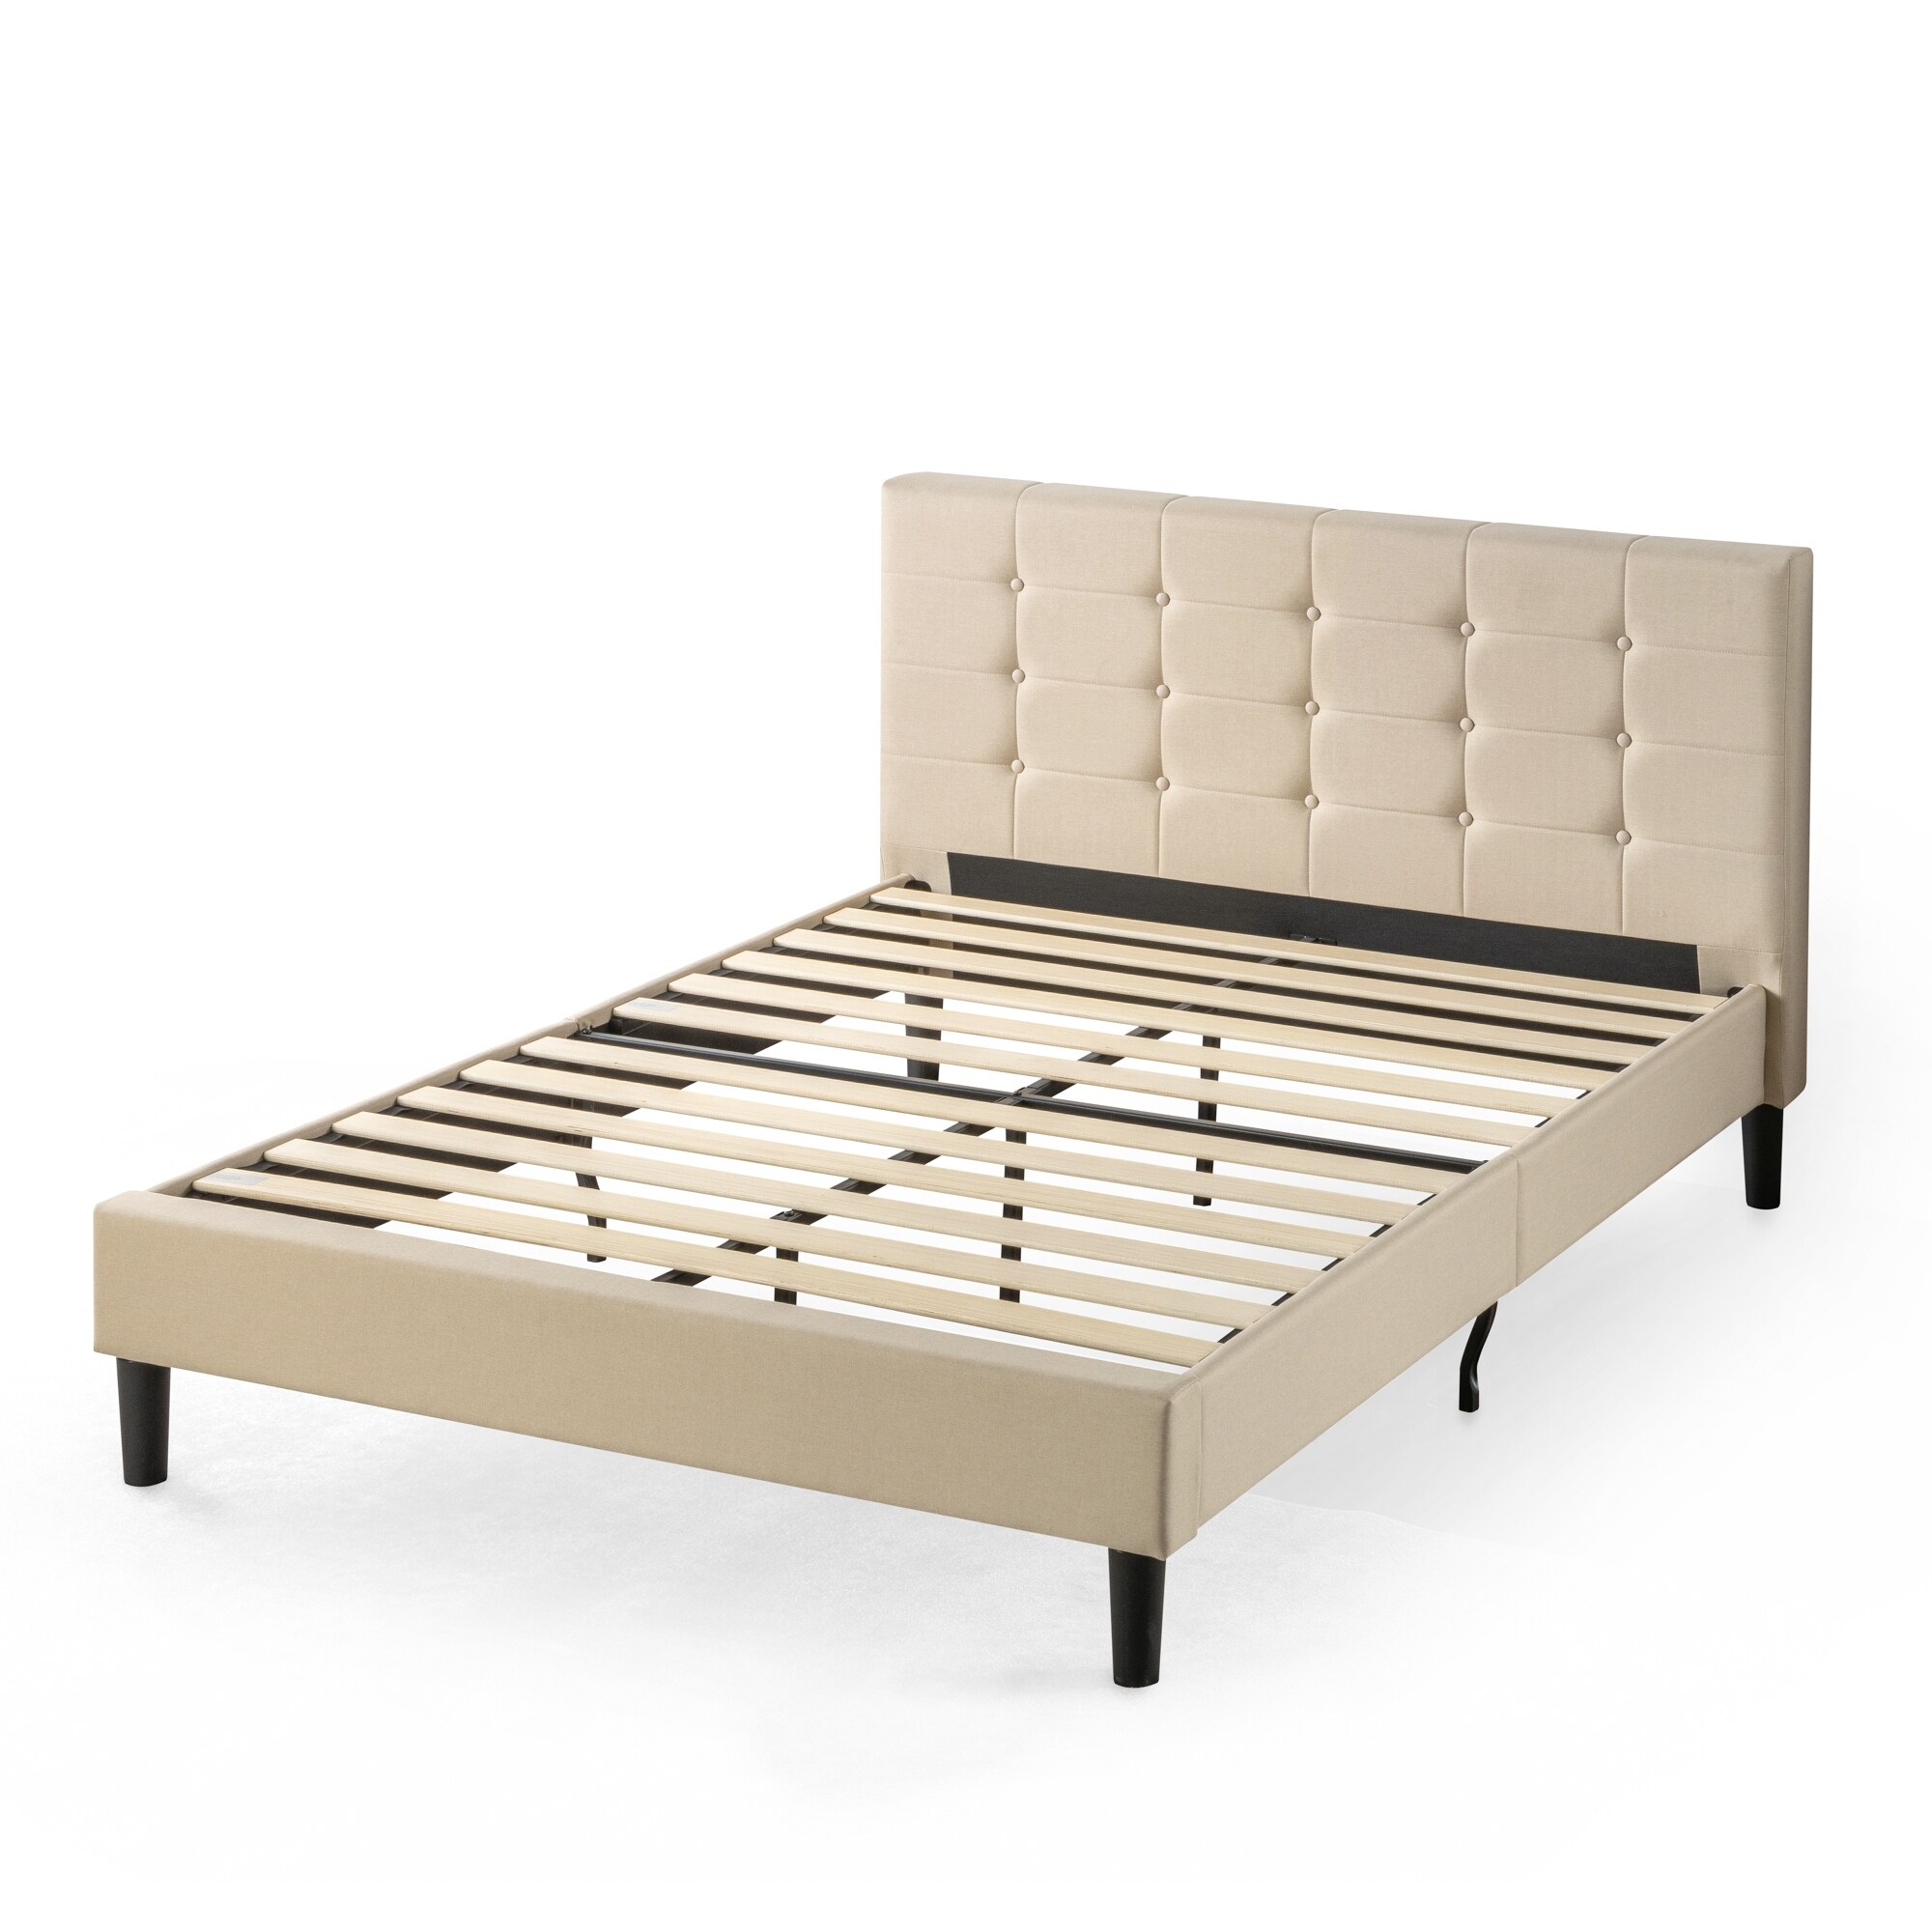 Priage by ZINUS Beige Upholstered Button Tufted Platform Bed - King